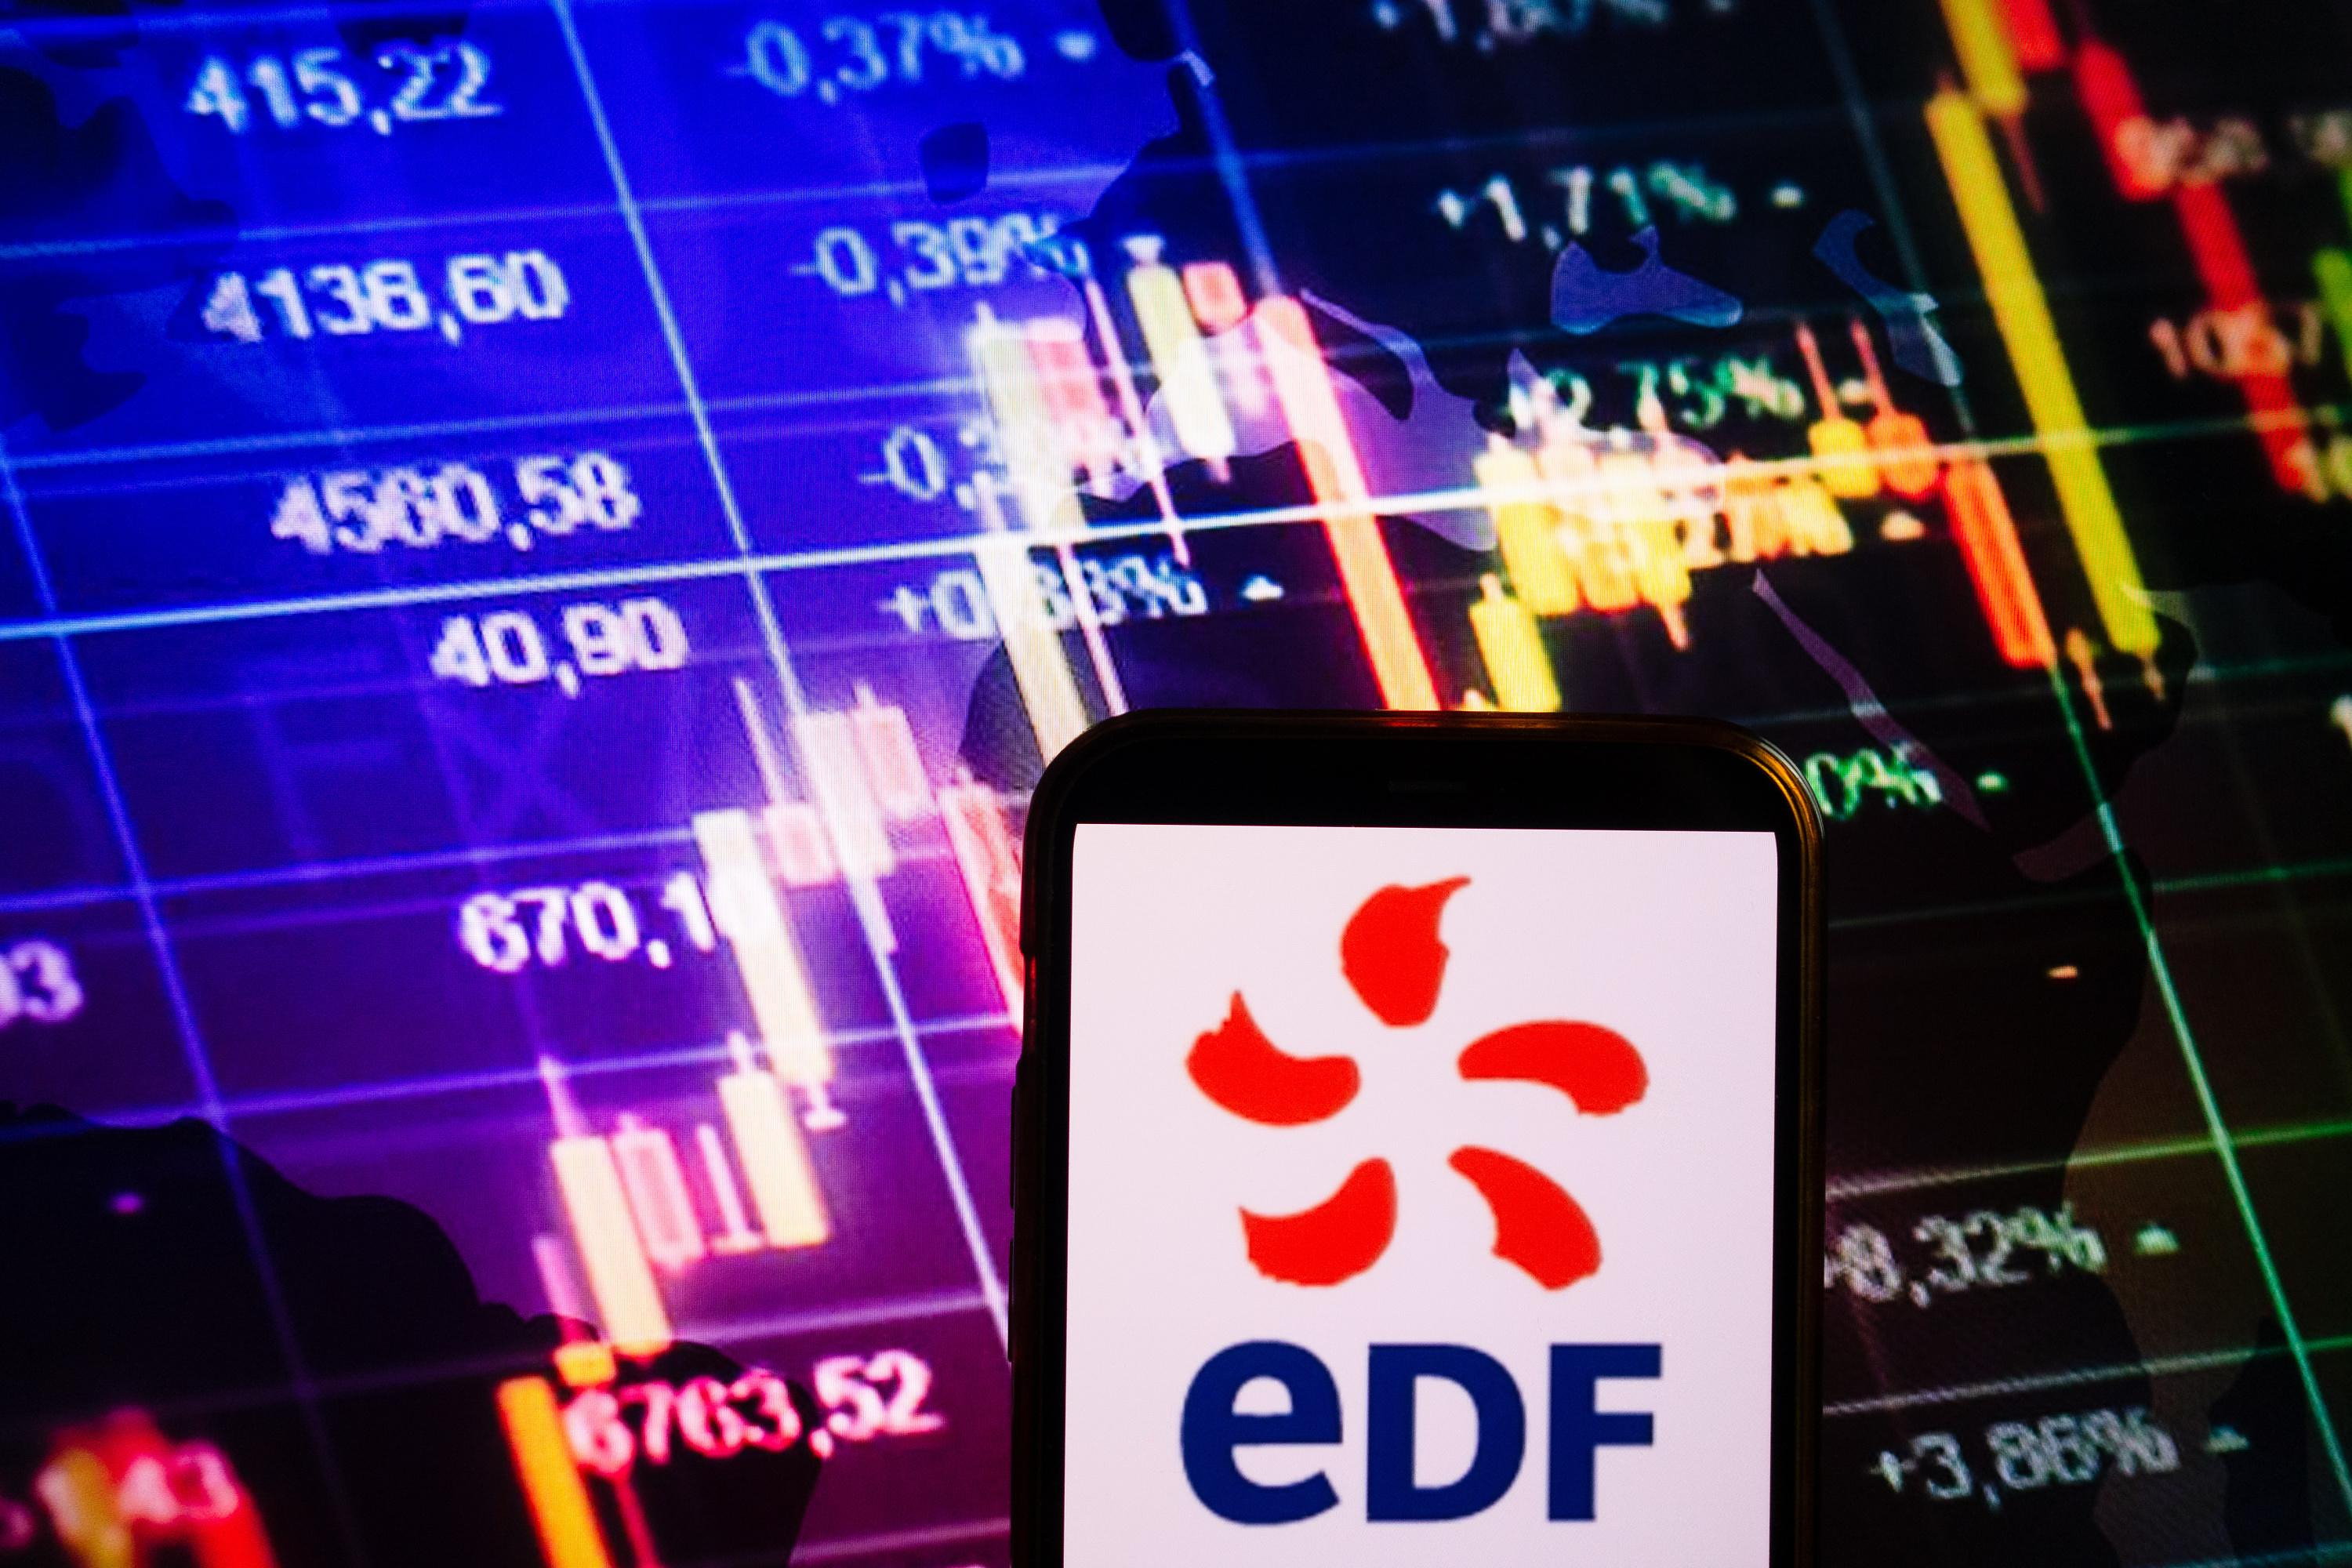 Rising electricity prices: EDF hits back at its competitors